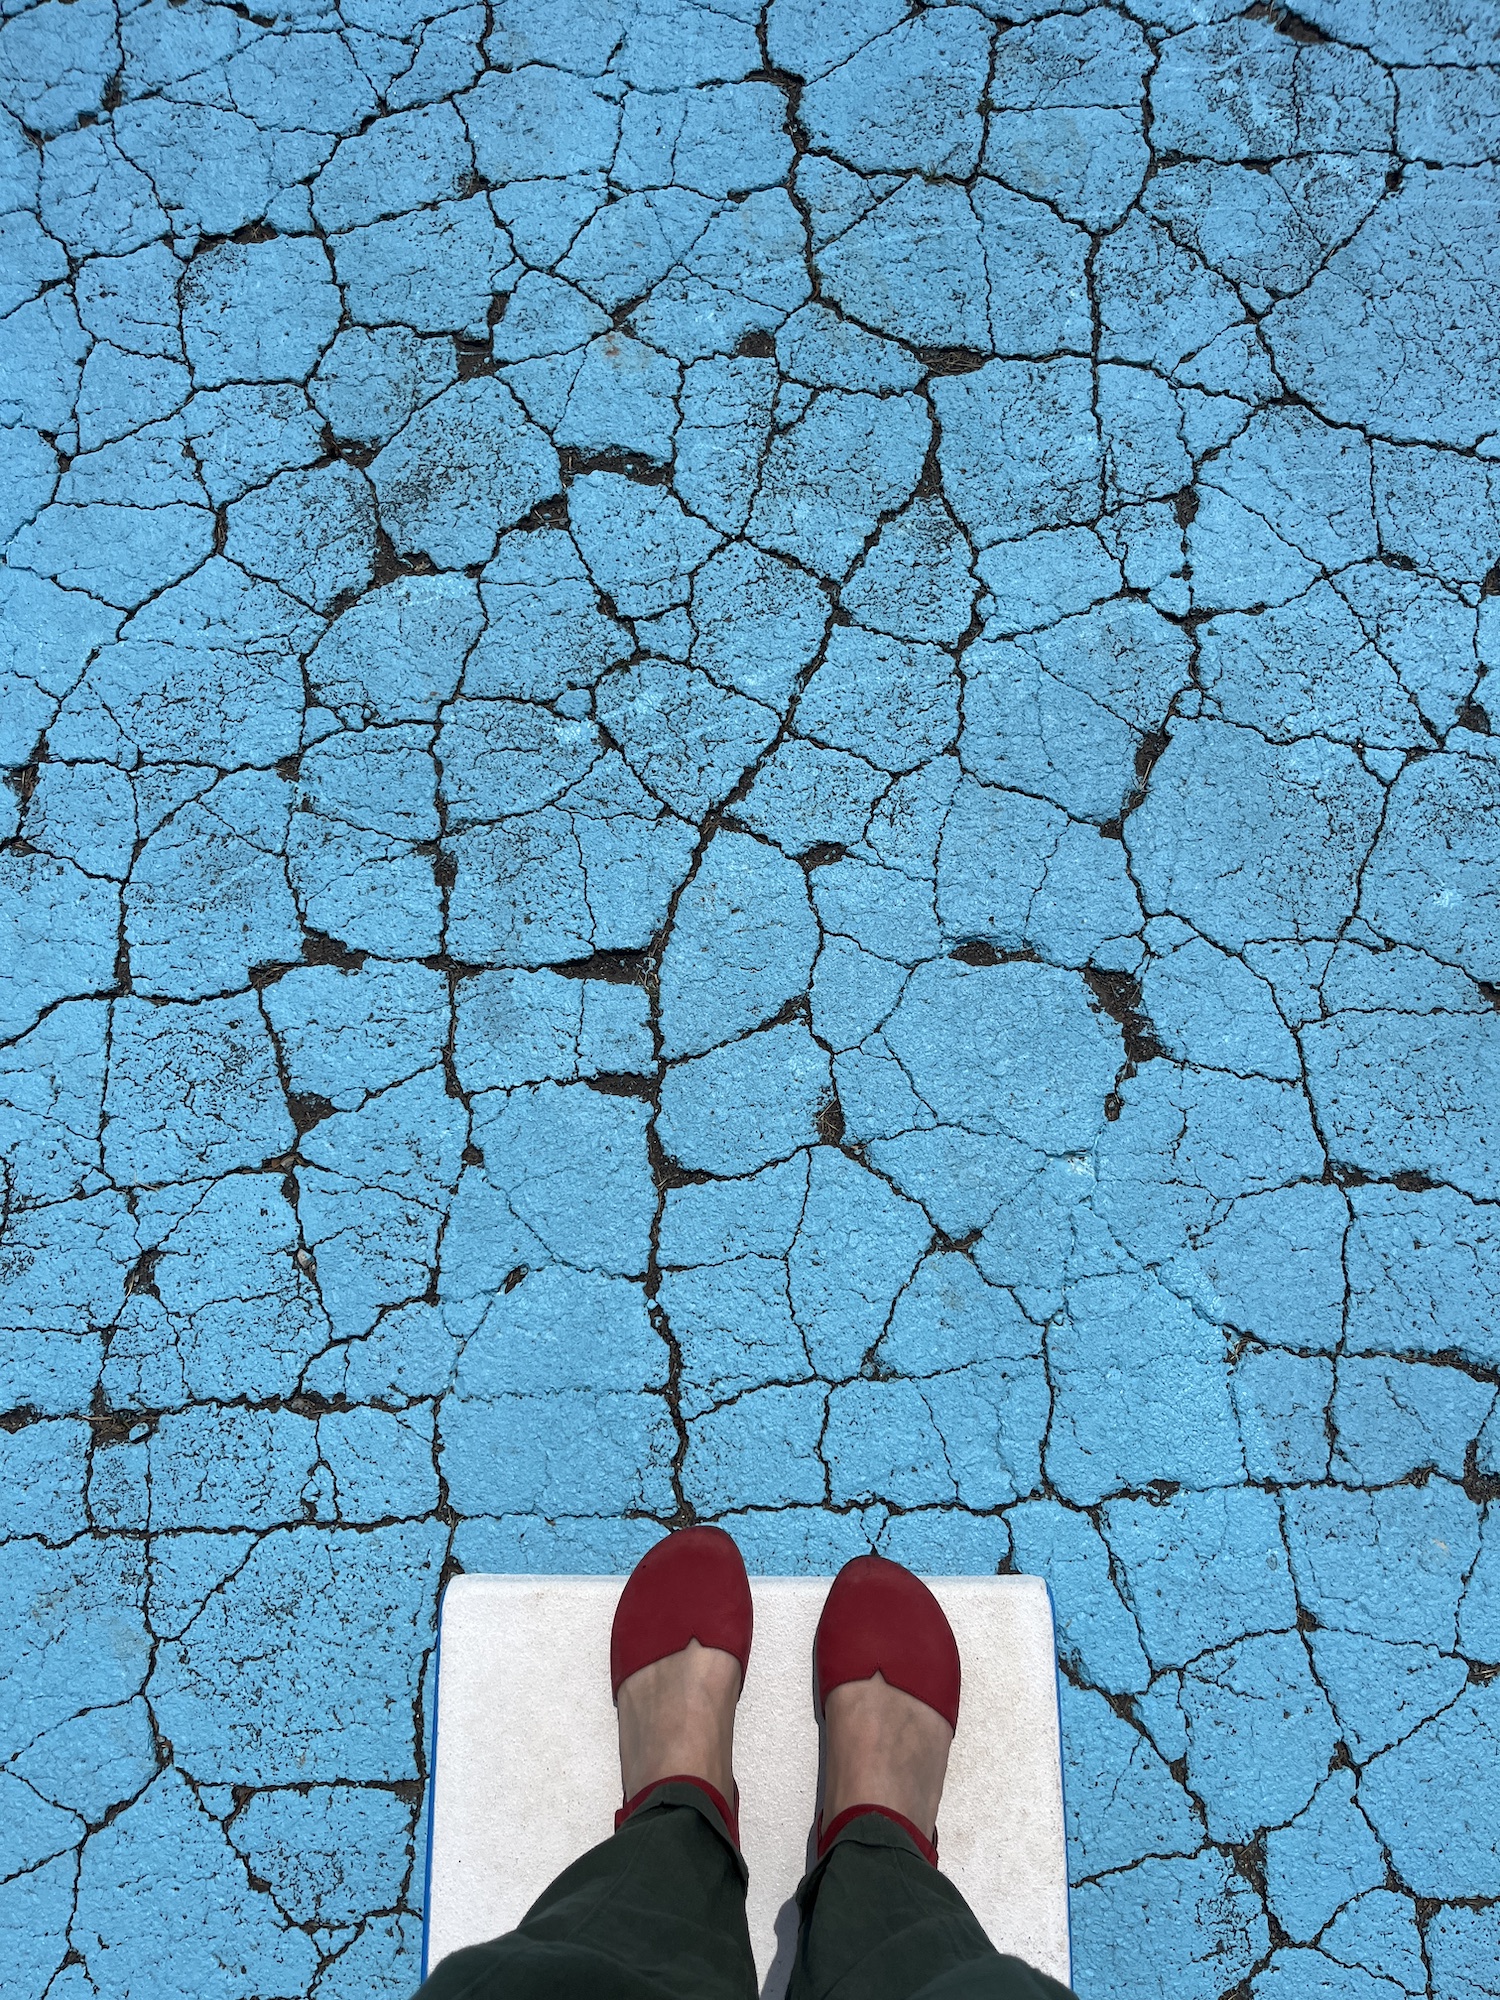 Feet on a diving board lay in the foreground against a light blue background of cracked asphalt.